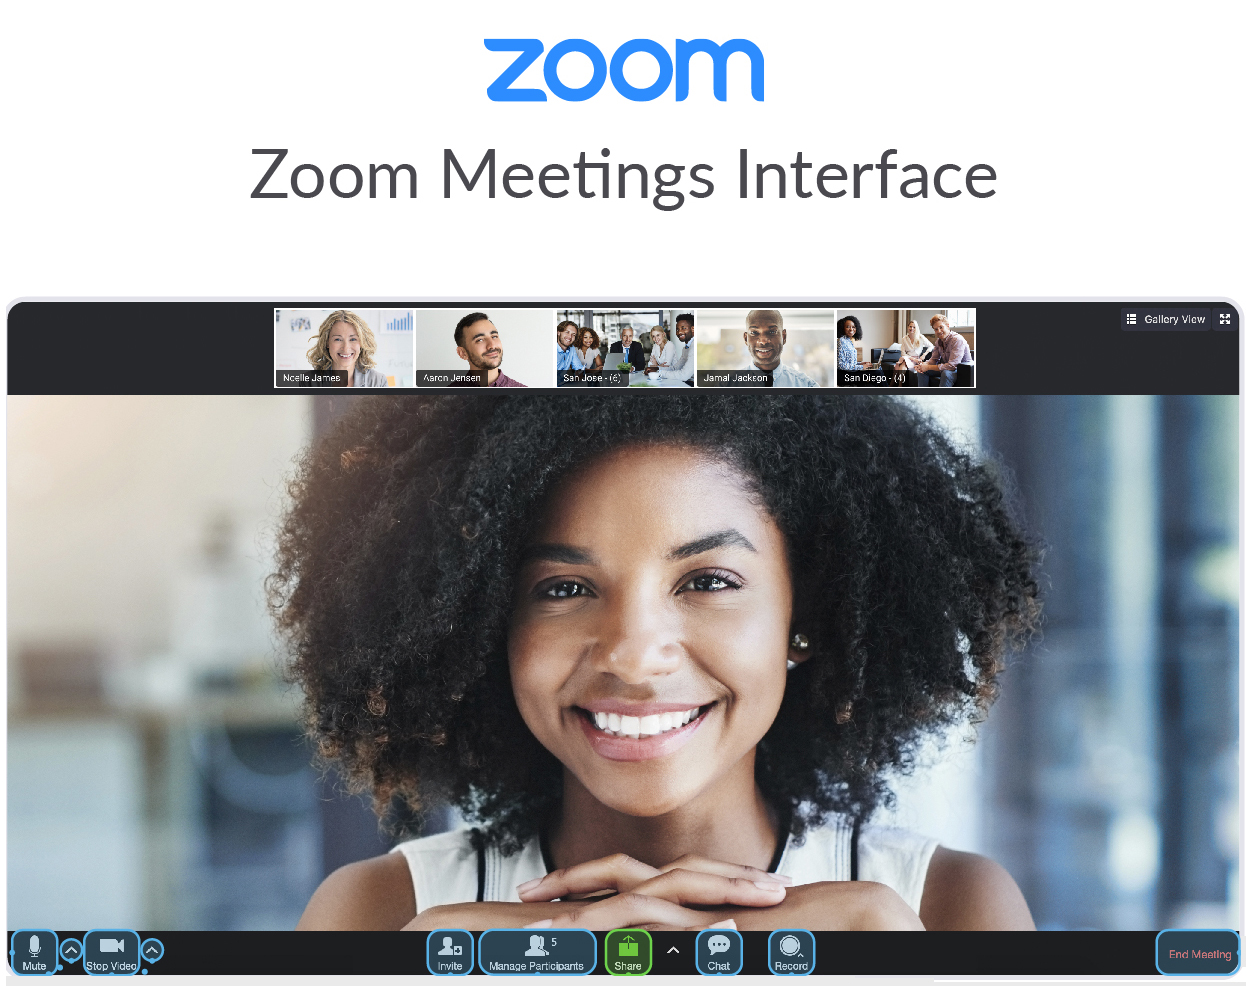 Zoom Meeting Interface guide